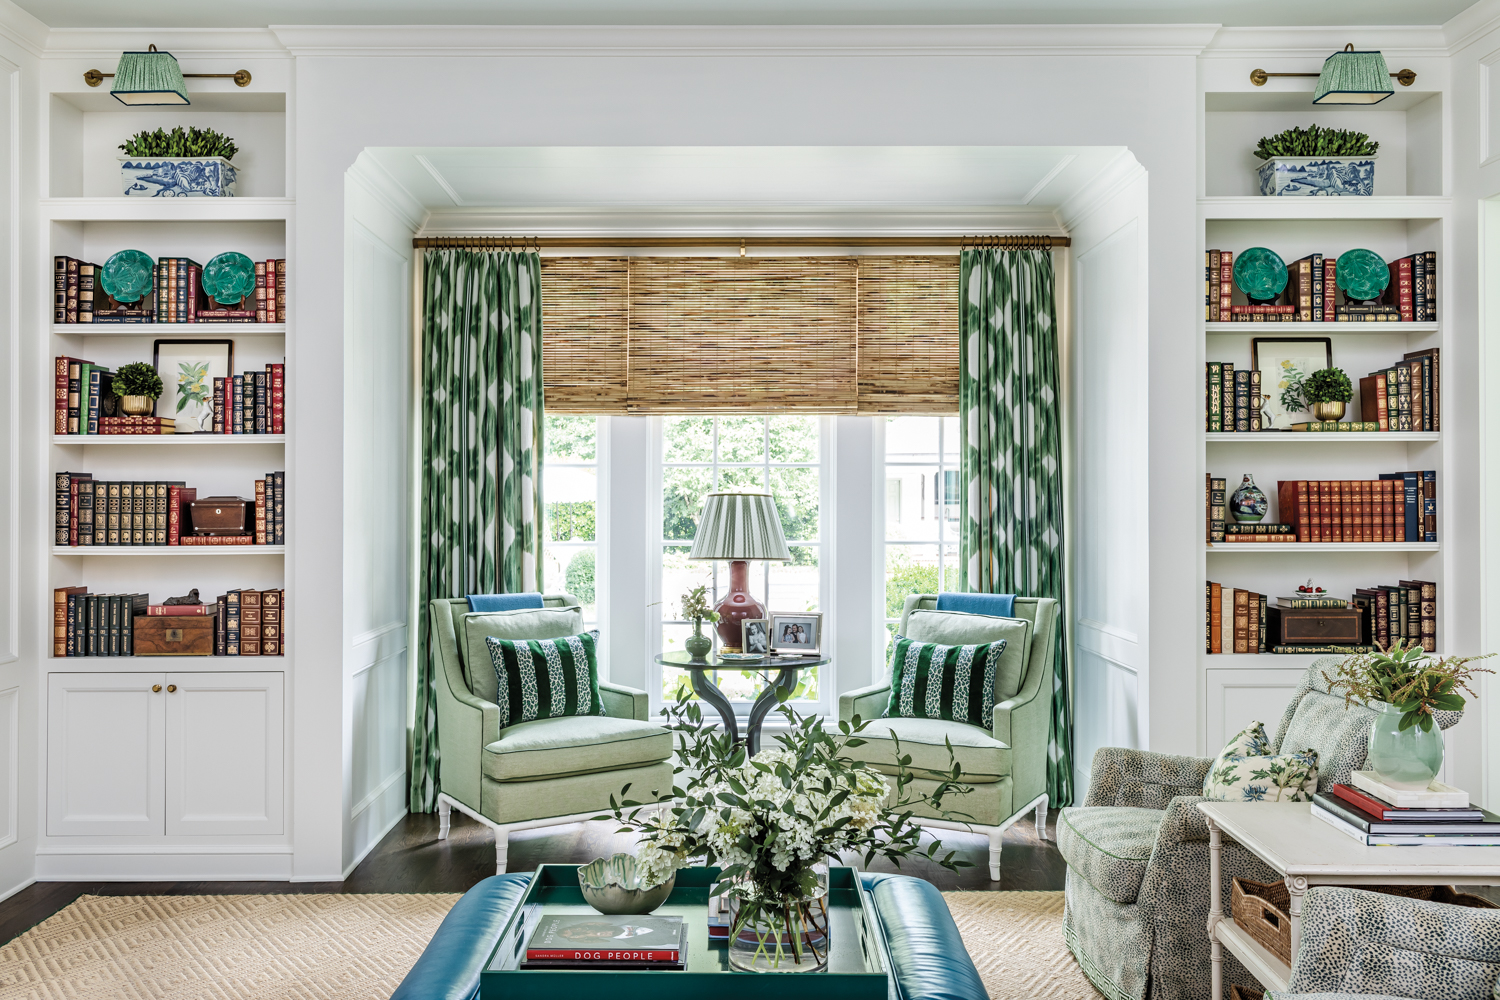 Vibrant Shades Of Green Pop In This Traditional Atlanta Family Home